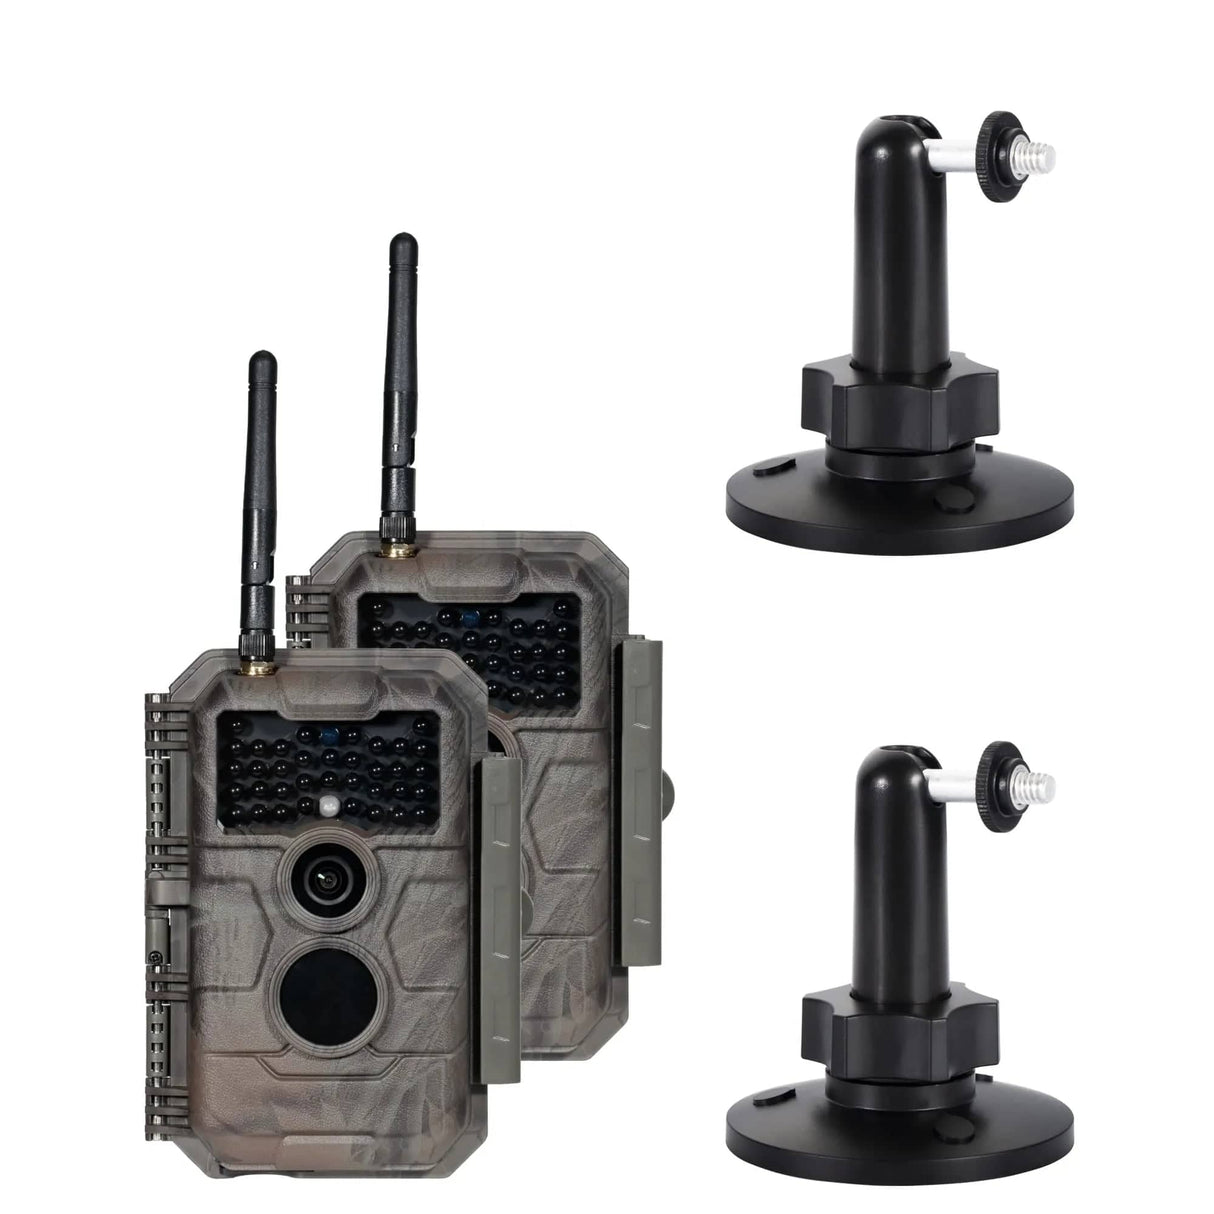  GardePro WiFi Trail Camera E6PMB With Rechargeable Battery & 32G Built-in Memory SD Card with Wallmount